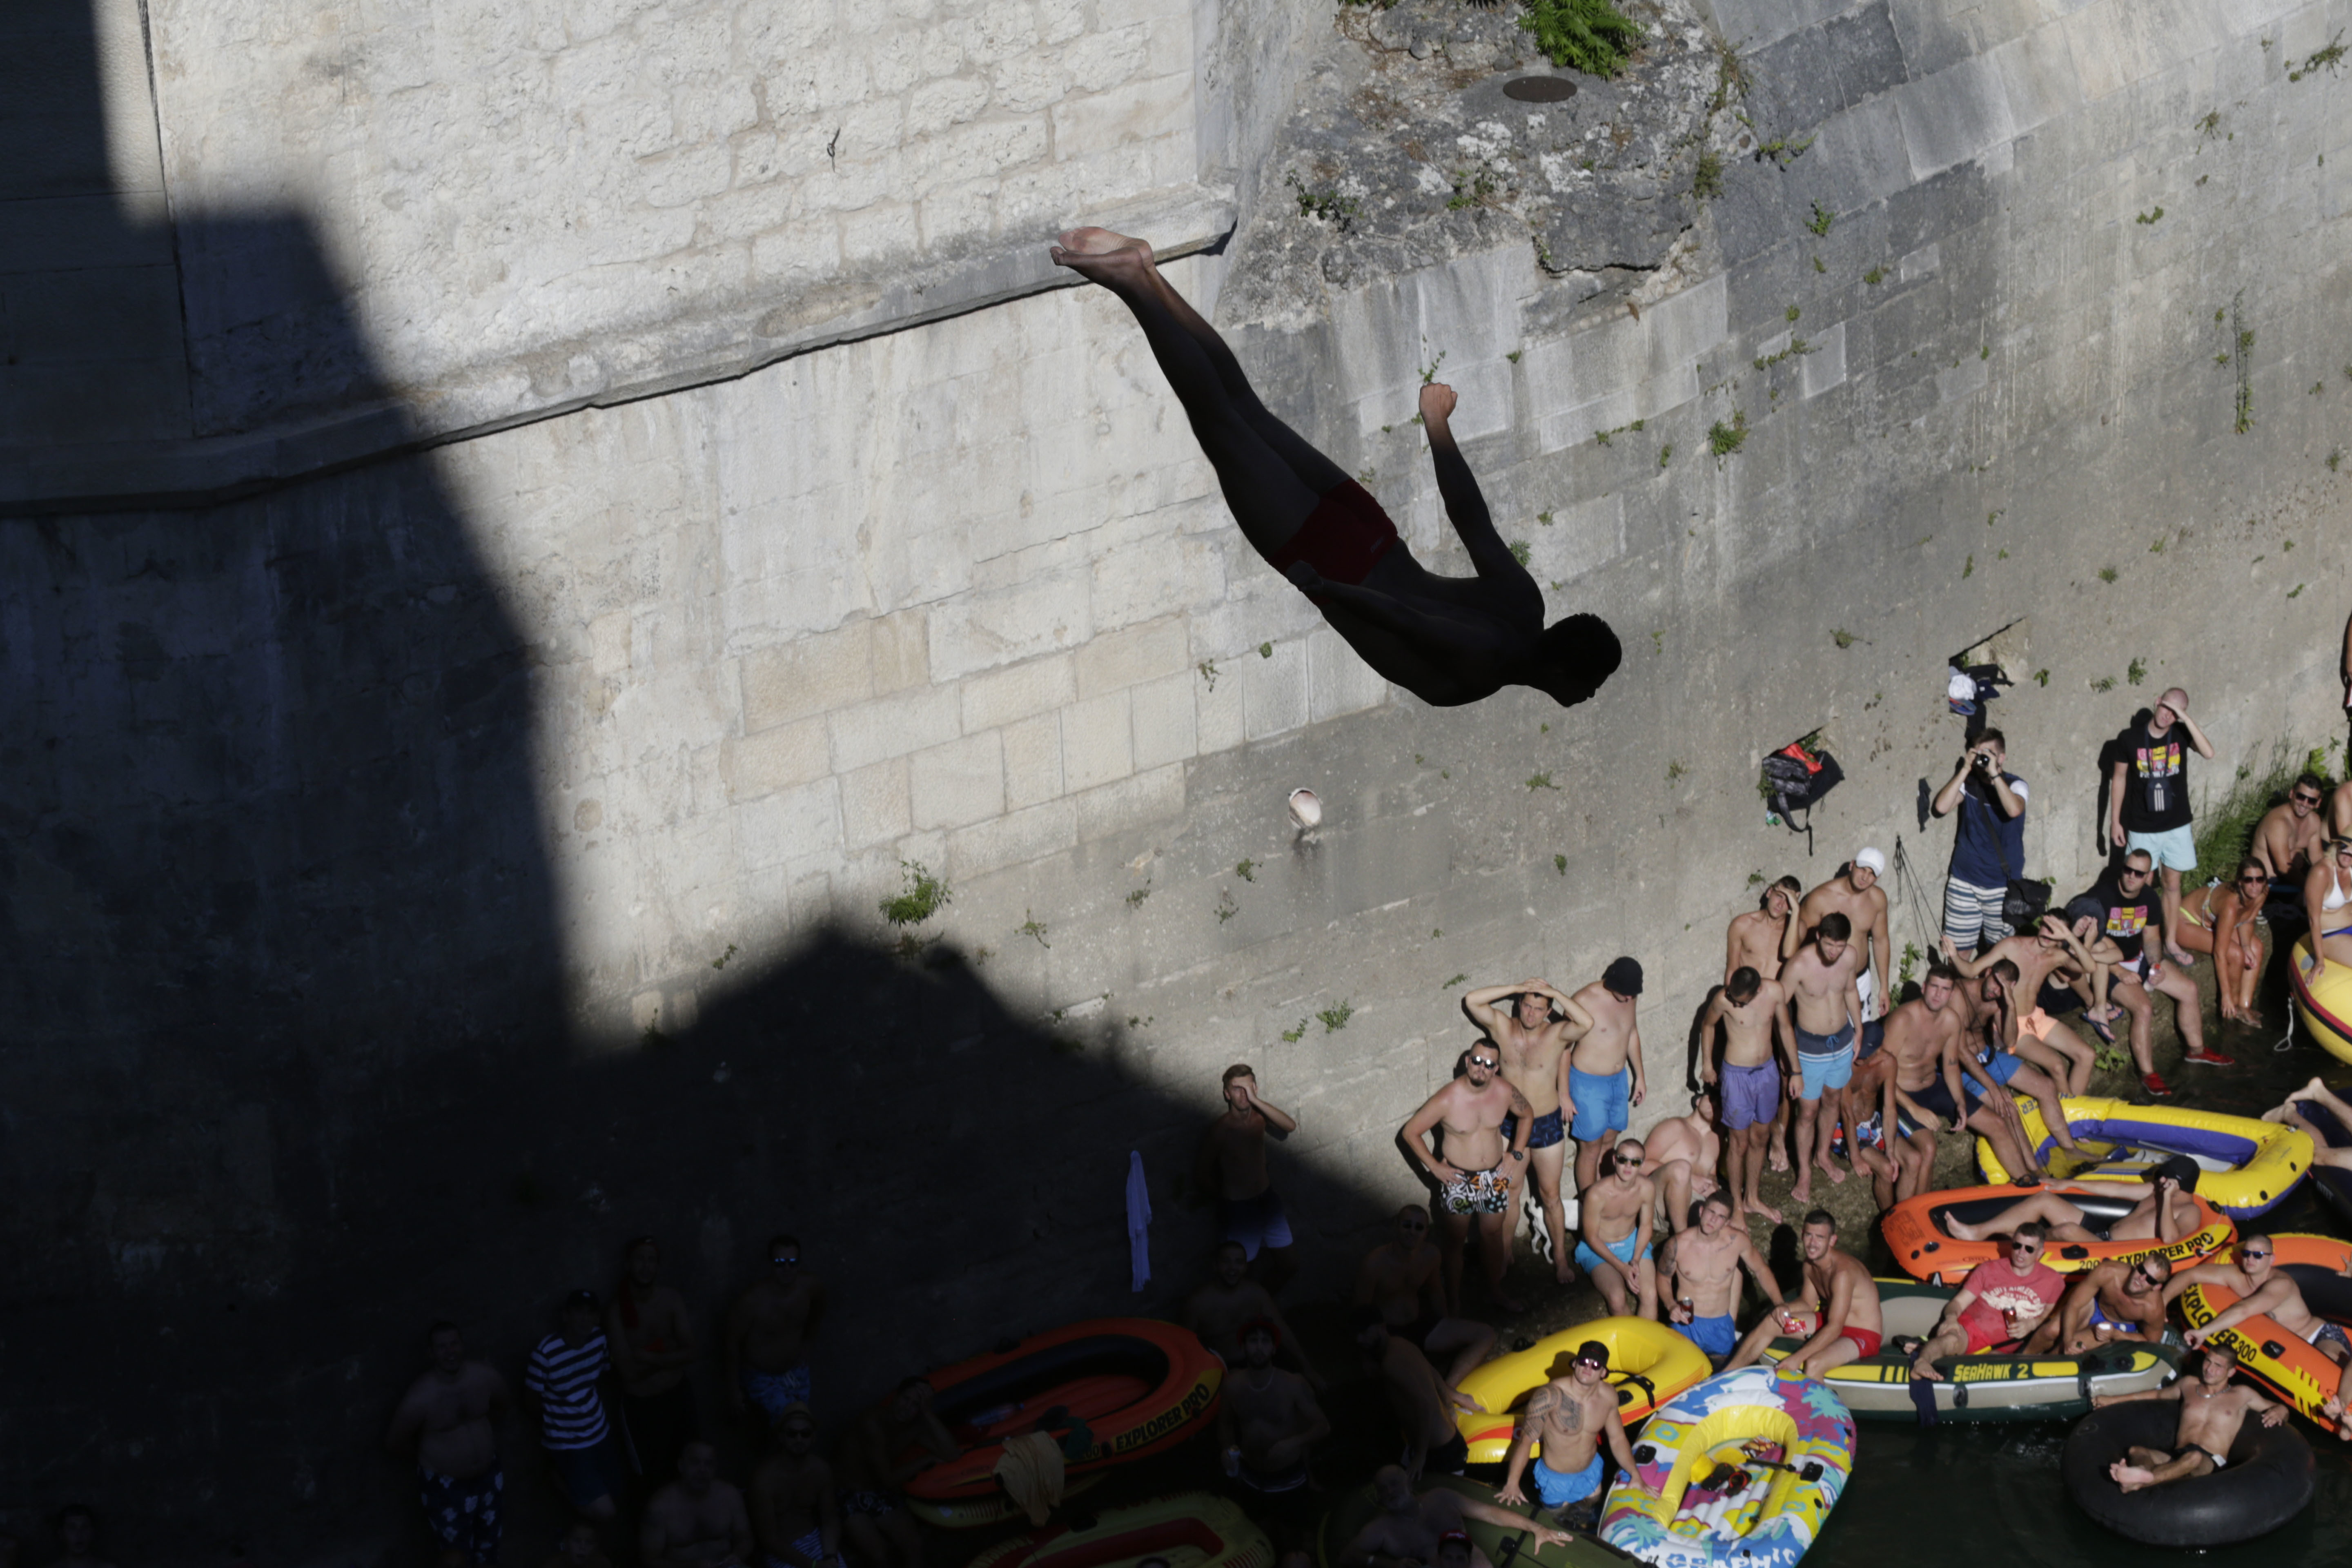 Spectators watch as a diver jumps from the Old Mostar Bridge during 451th traditional annual high diving competition, in Mostar, 140 kms south of Bosnian capital of Sarajevo, Sunday, July 30, 2017. Total of 41 divers from Bosnia and neighbouring countries competed diving from 25 meters high Old Mostar Bridge into the Neretva river. (AP Photo/Amel Emric)